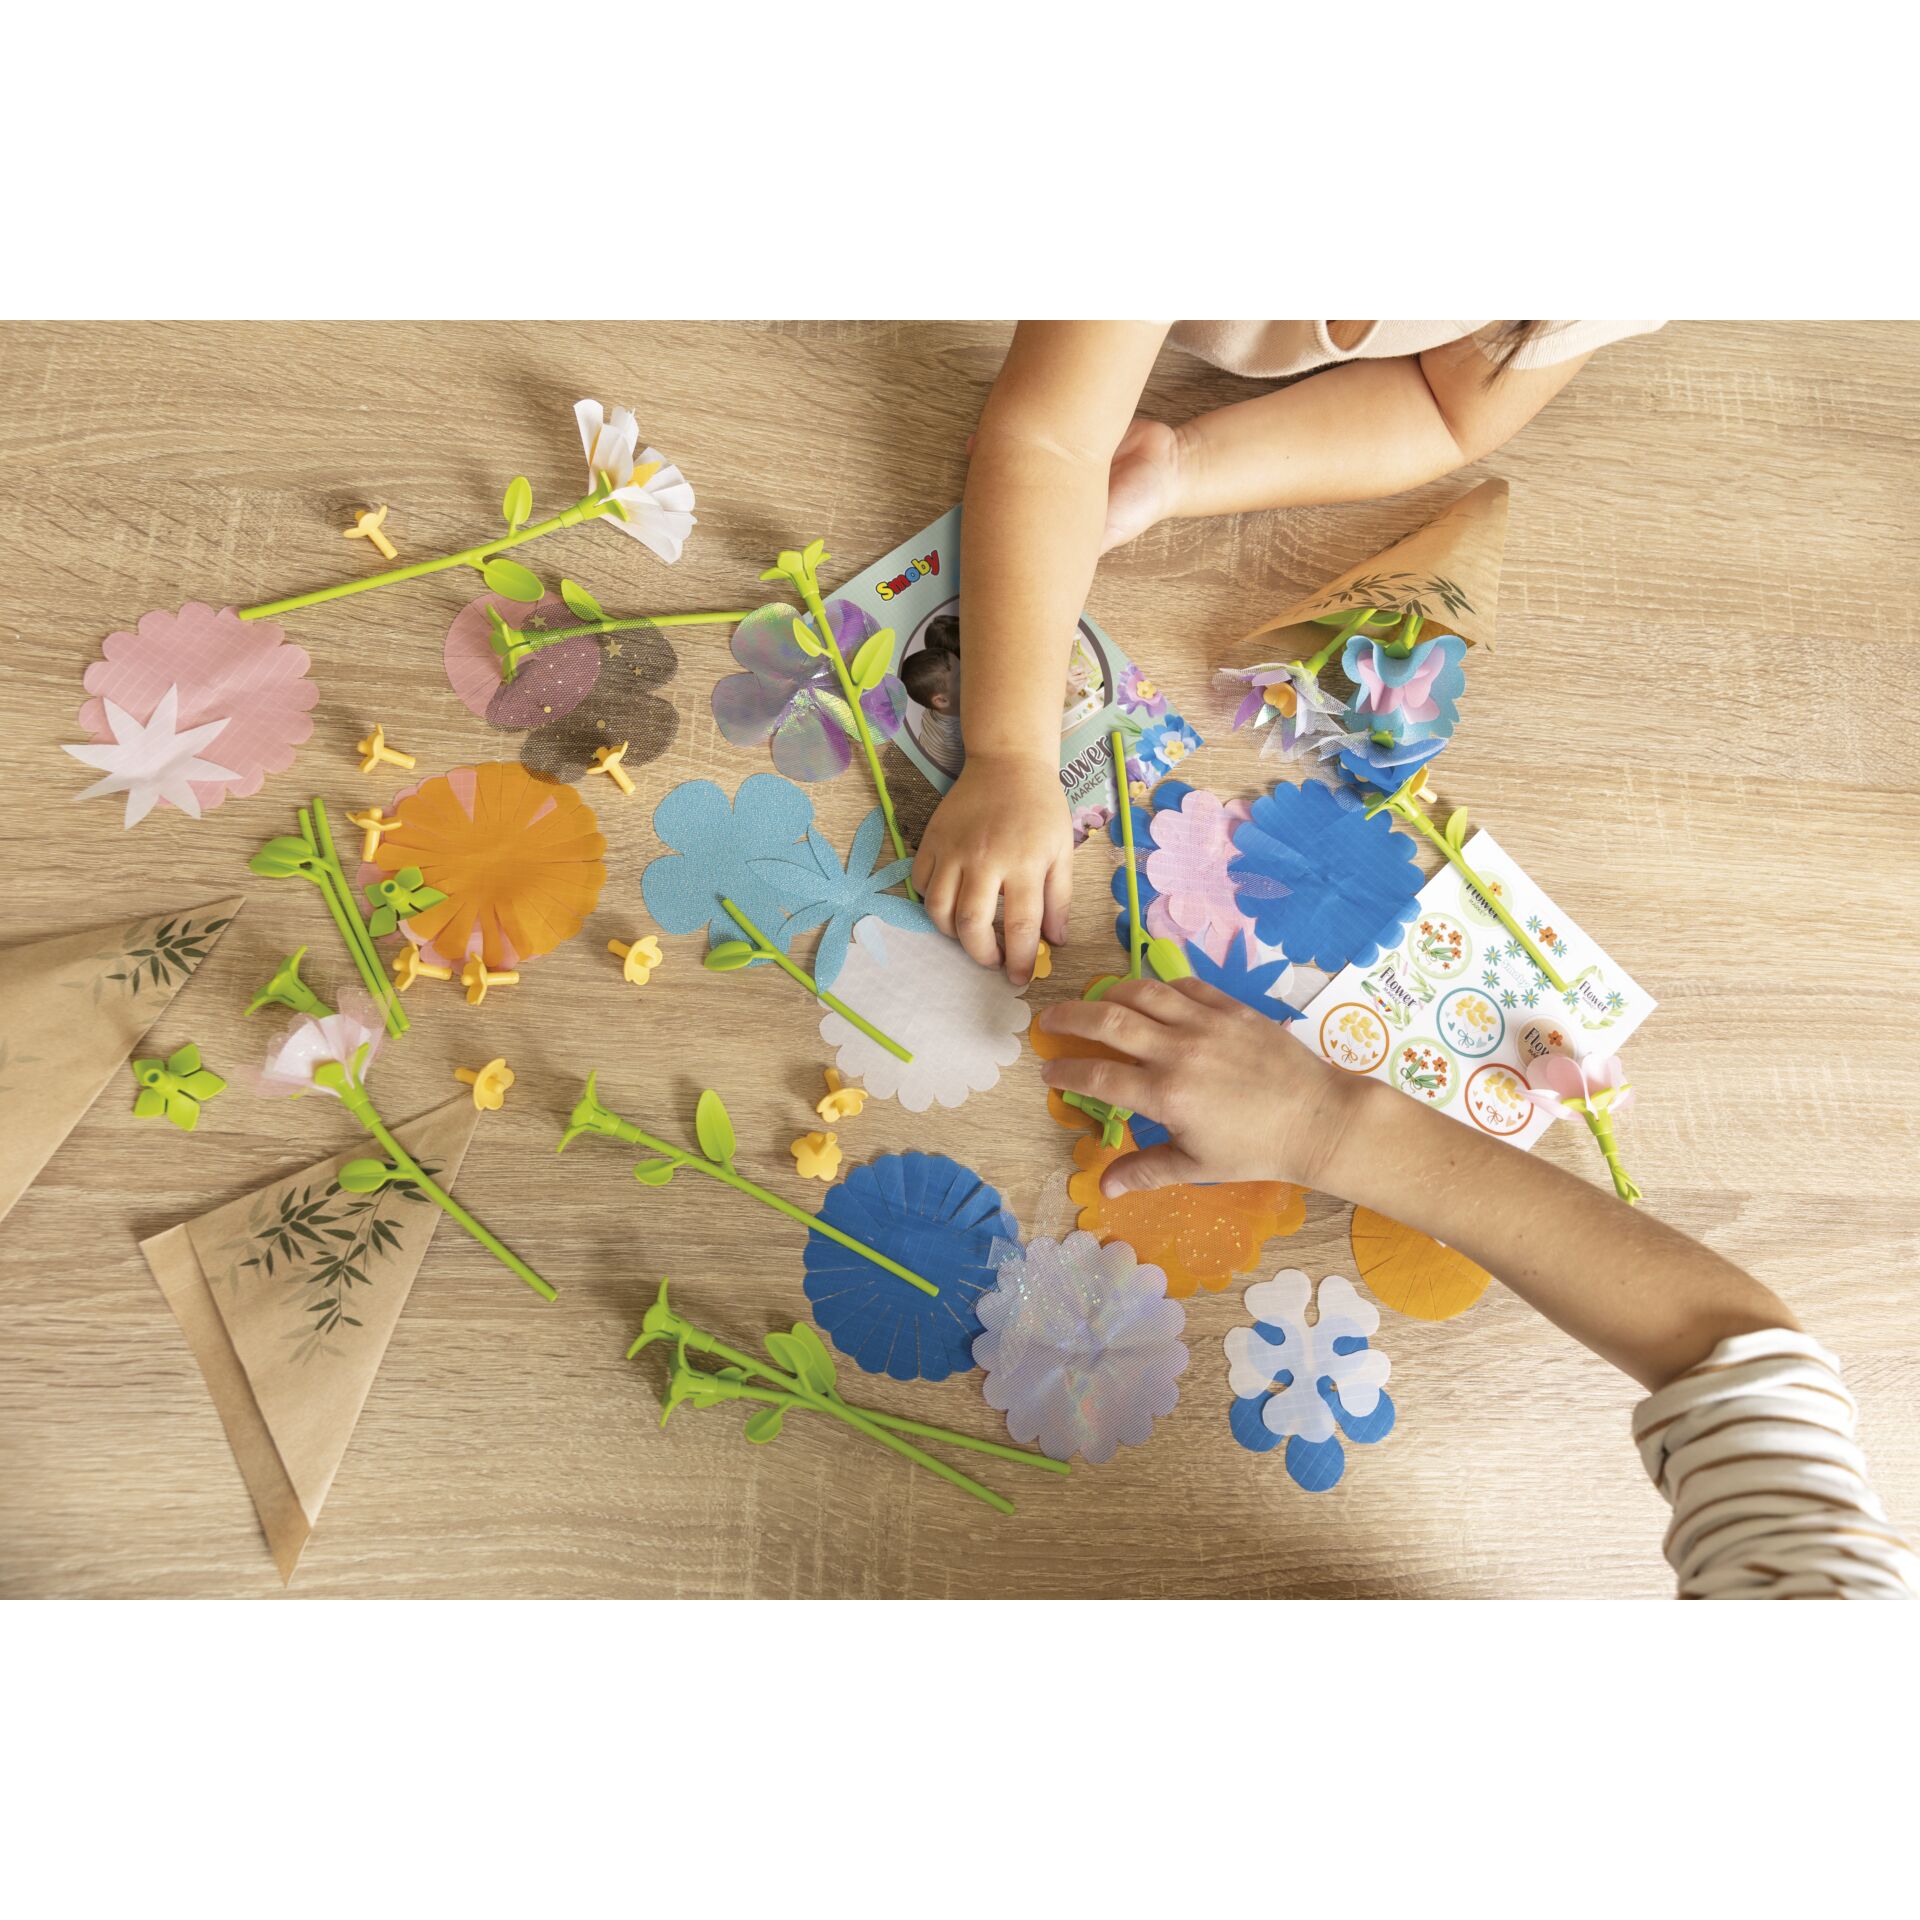 Smoby Flower Market - flower shop play set 350407 buy in the online store  at Best Price